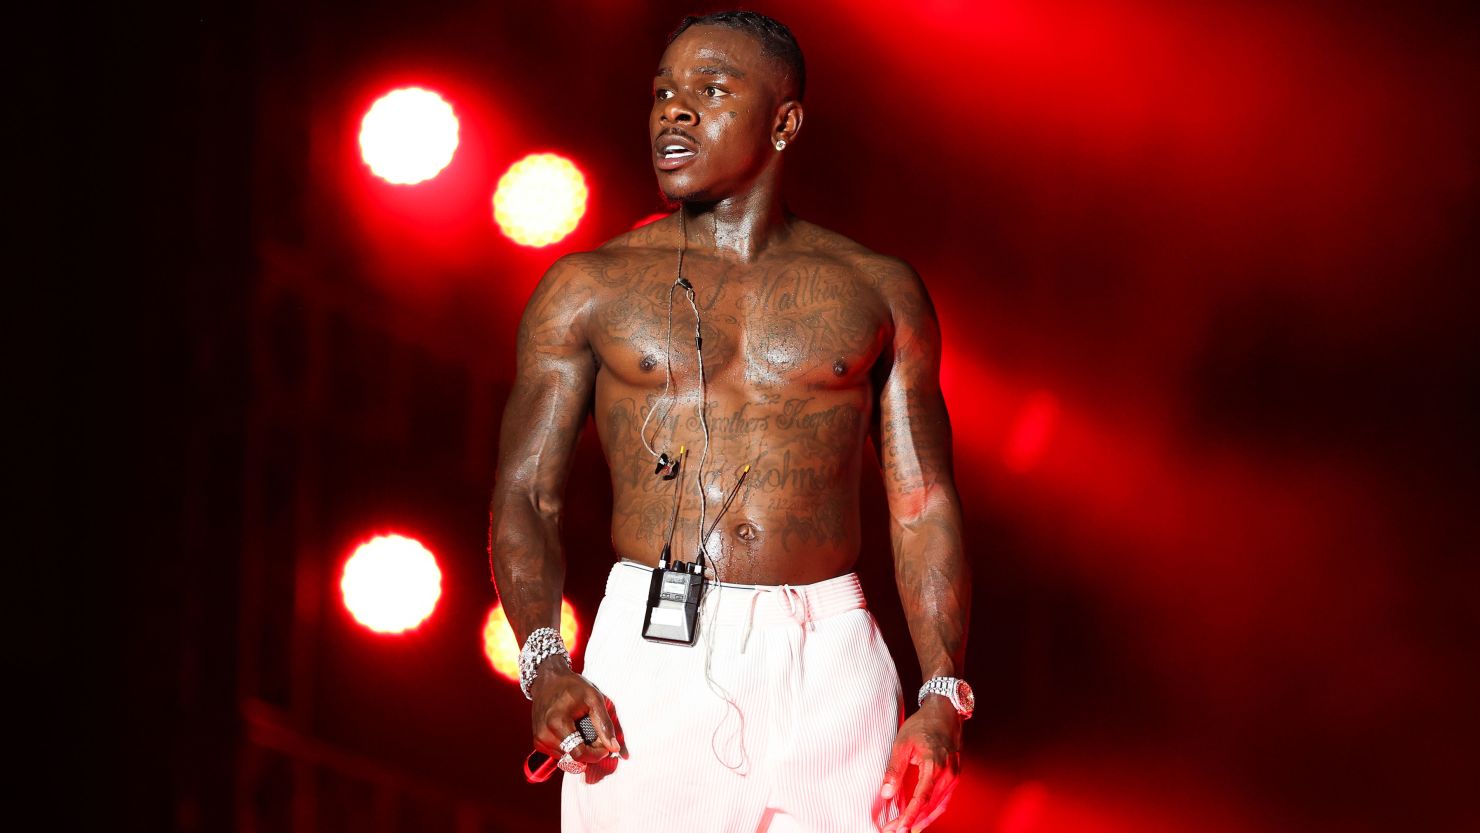 Lollapalooza canceled DaBaby's performance after his comments sparked backlash.